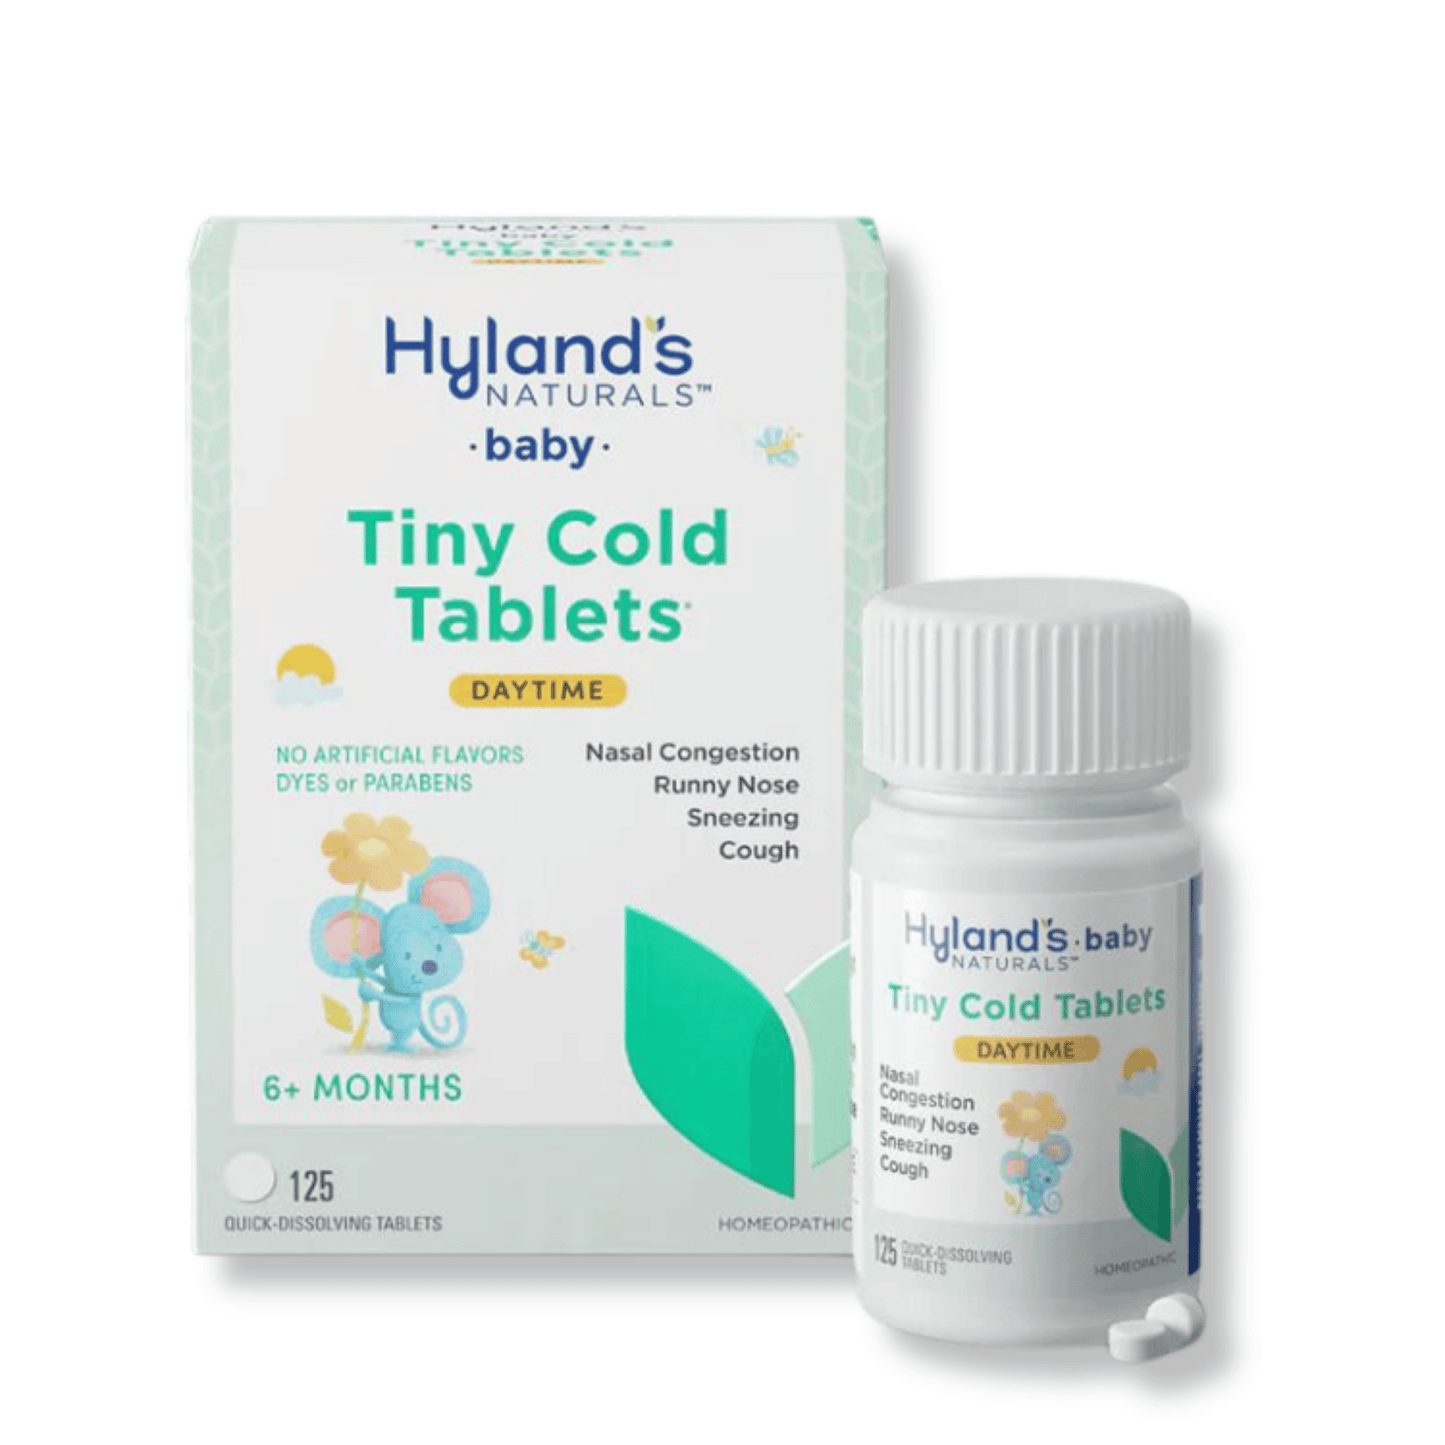 Primary Image of Baby Tiny Cold Daytime Tablets